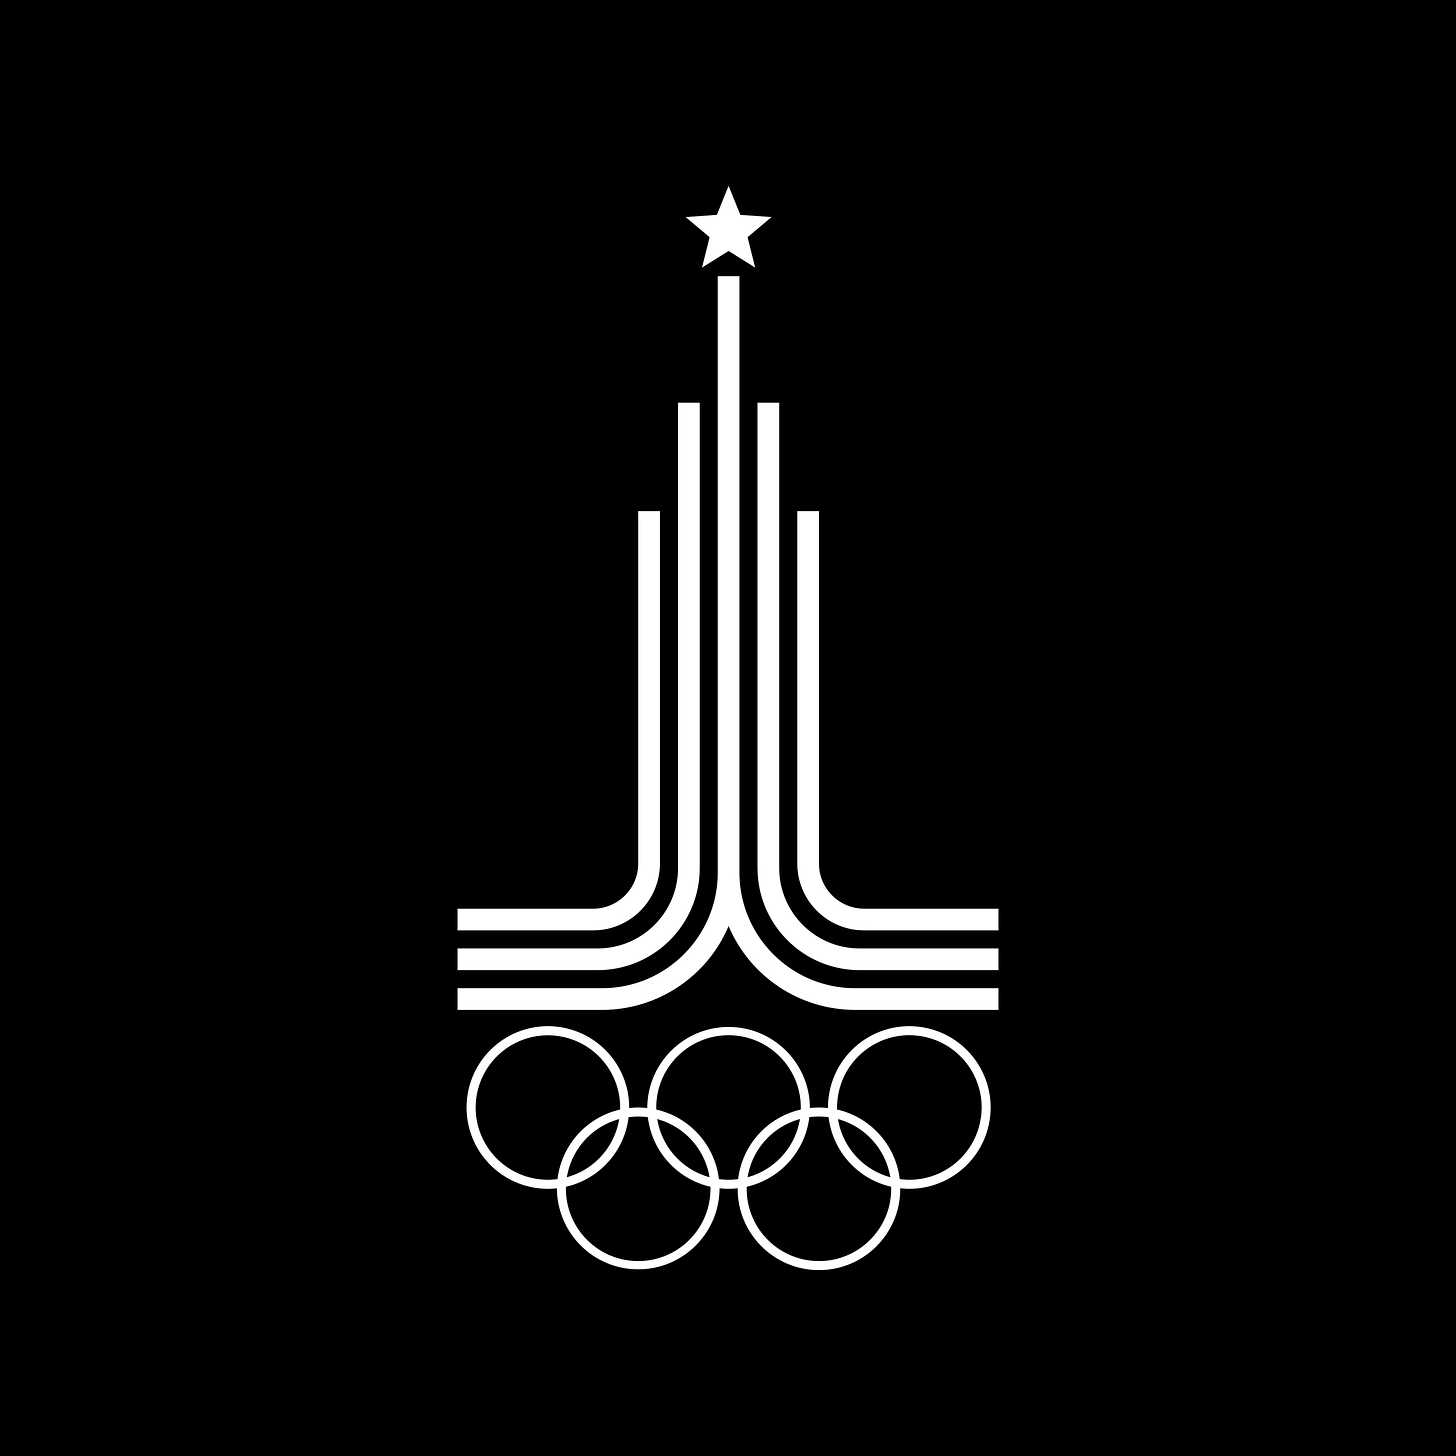 Vladimir Arsentiev's 1976 logo for the Moscow Summer Olympic Games